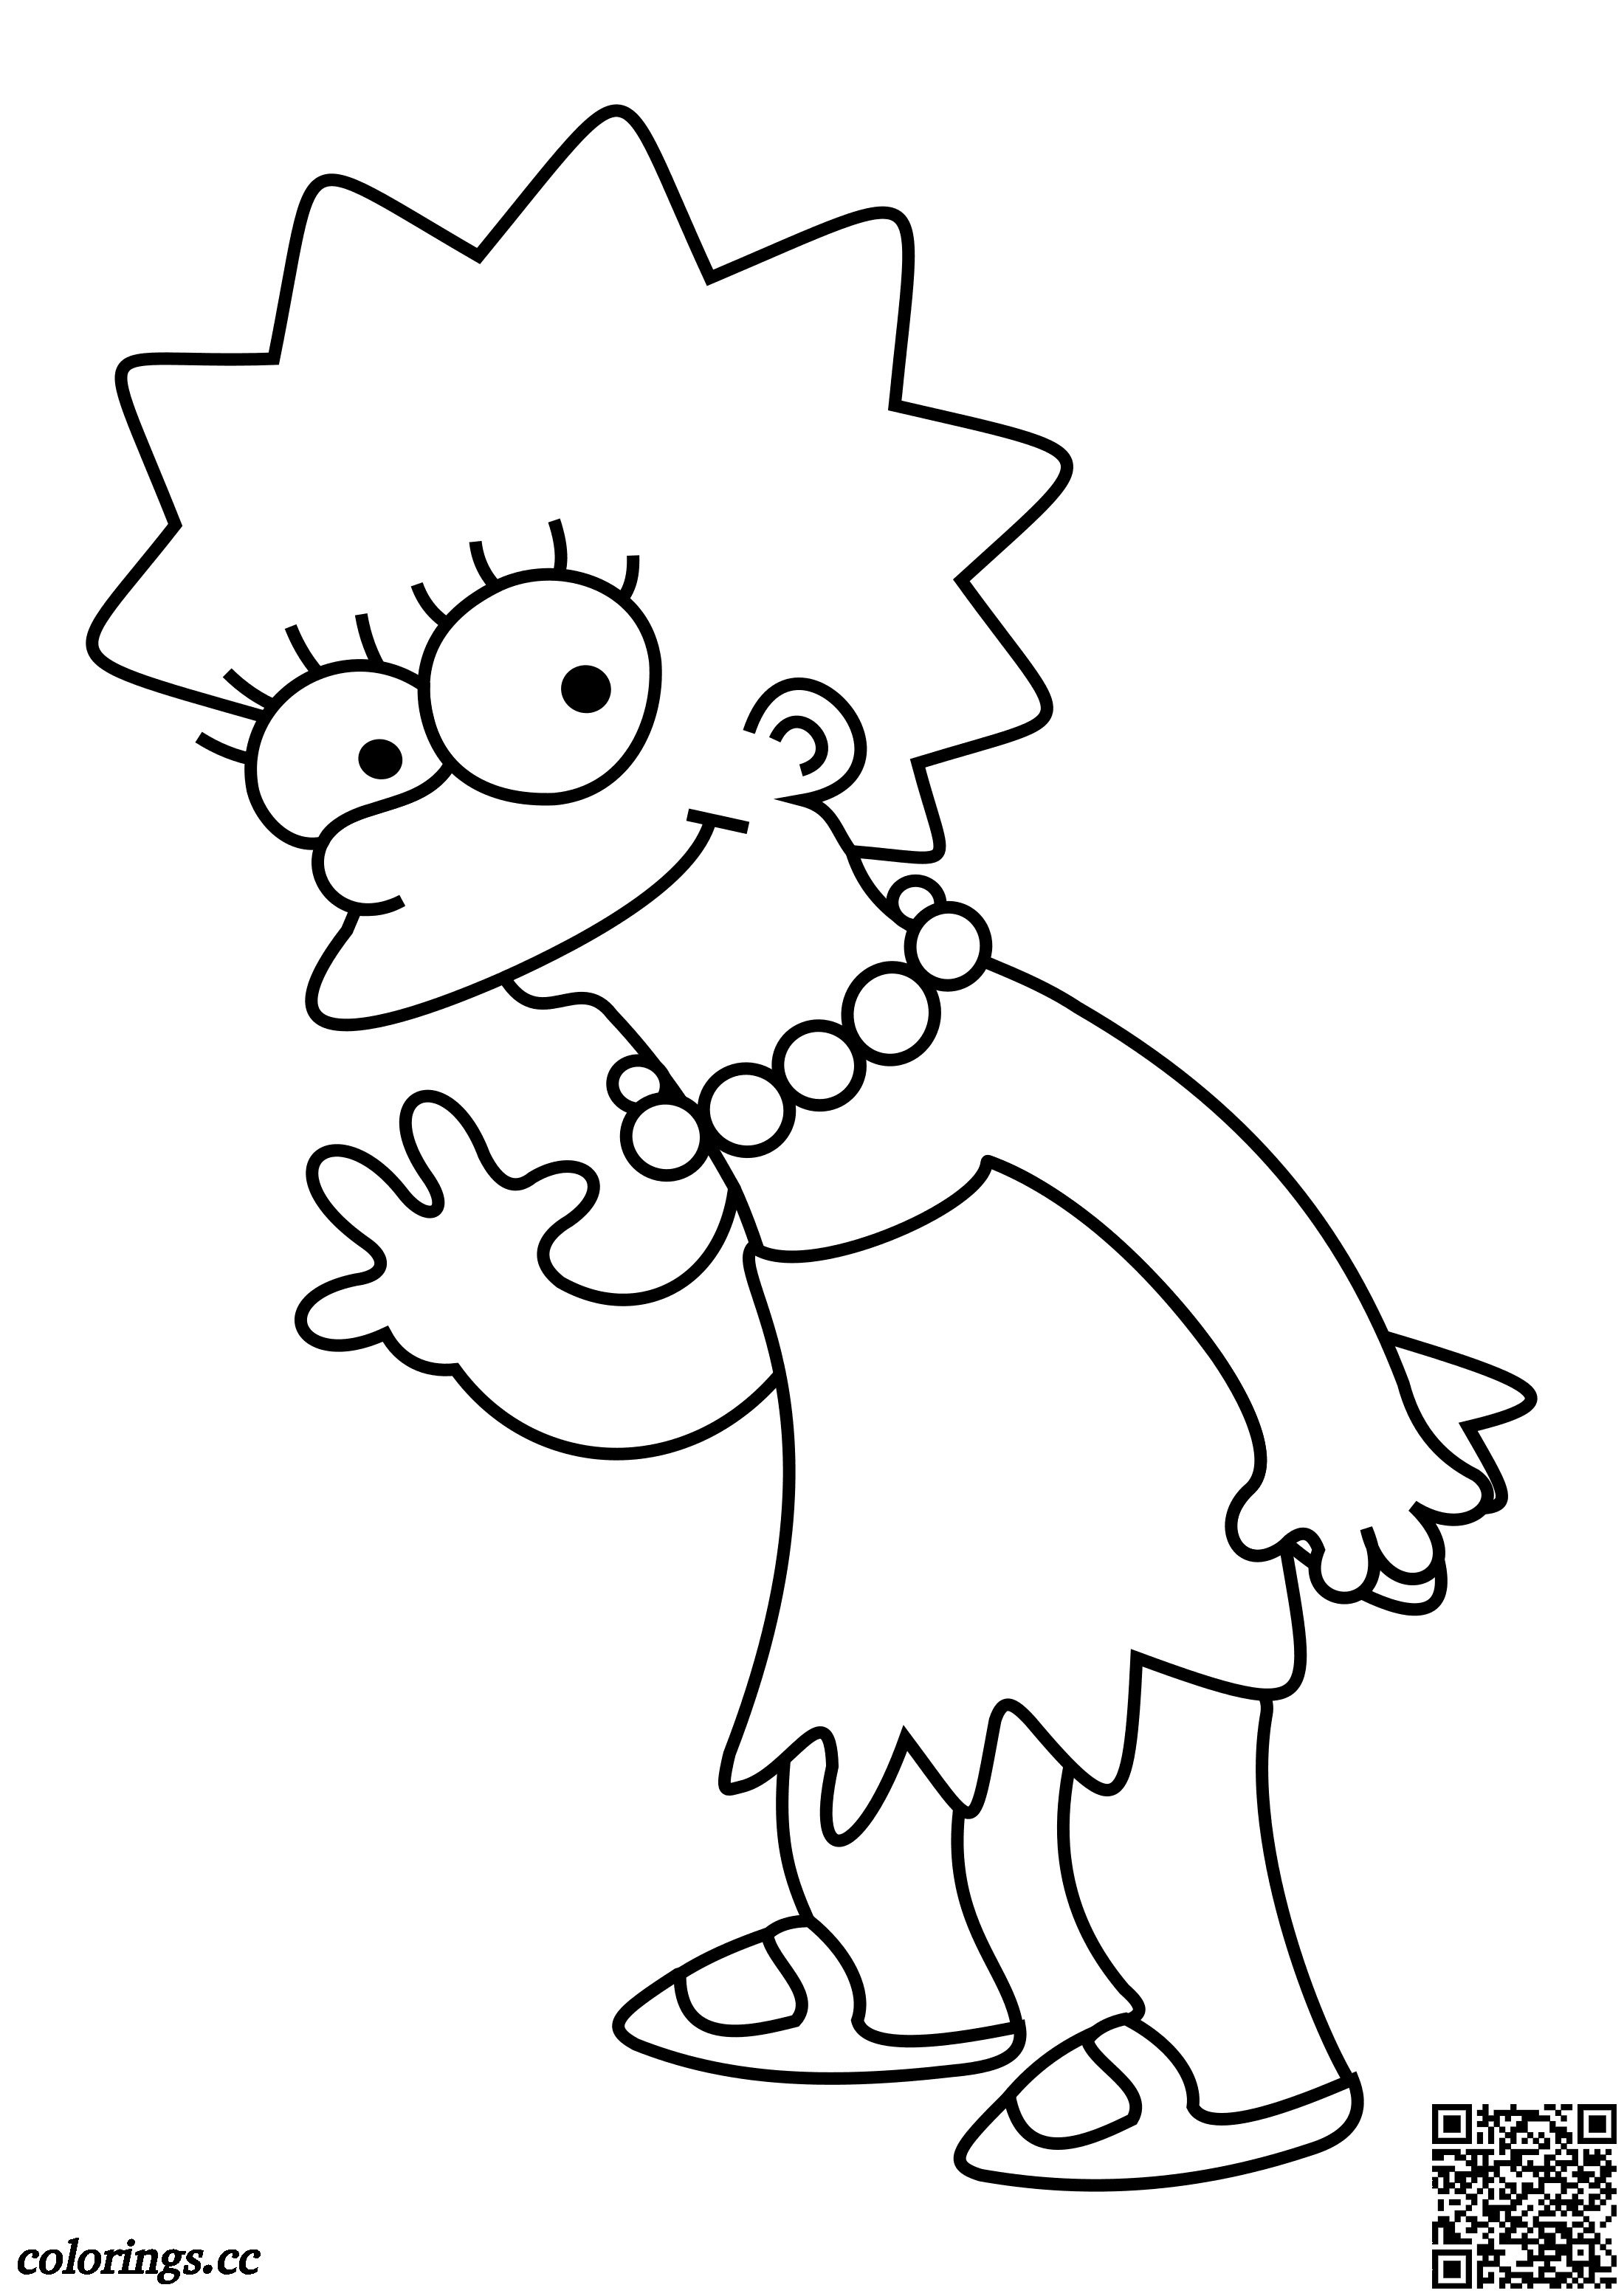 Lisa Simpson coloring pages, The Simpsons coloring pages ...